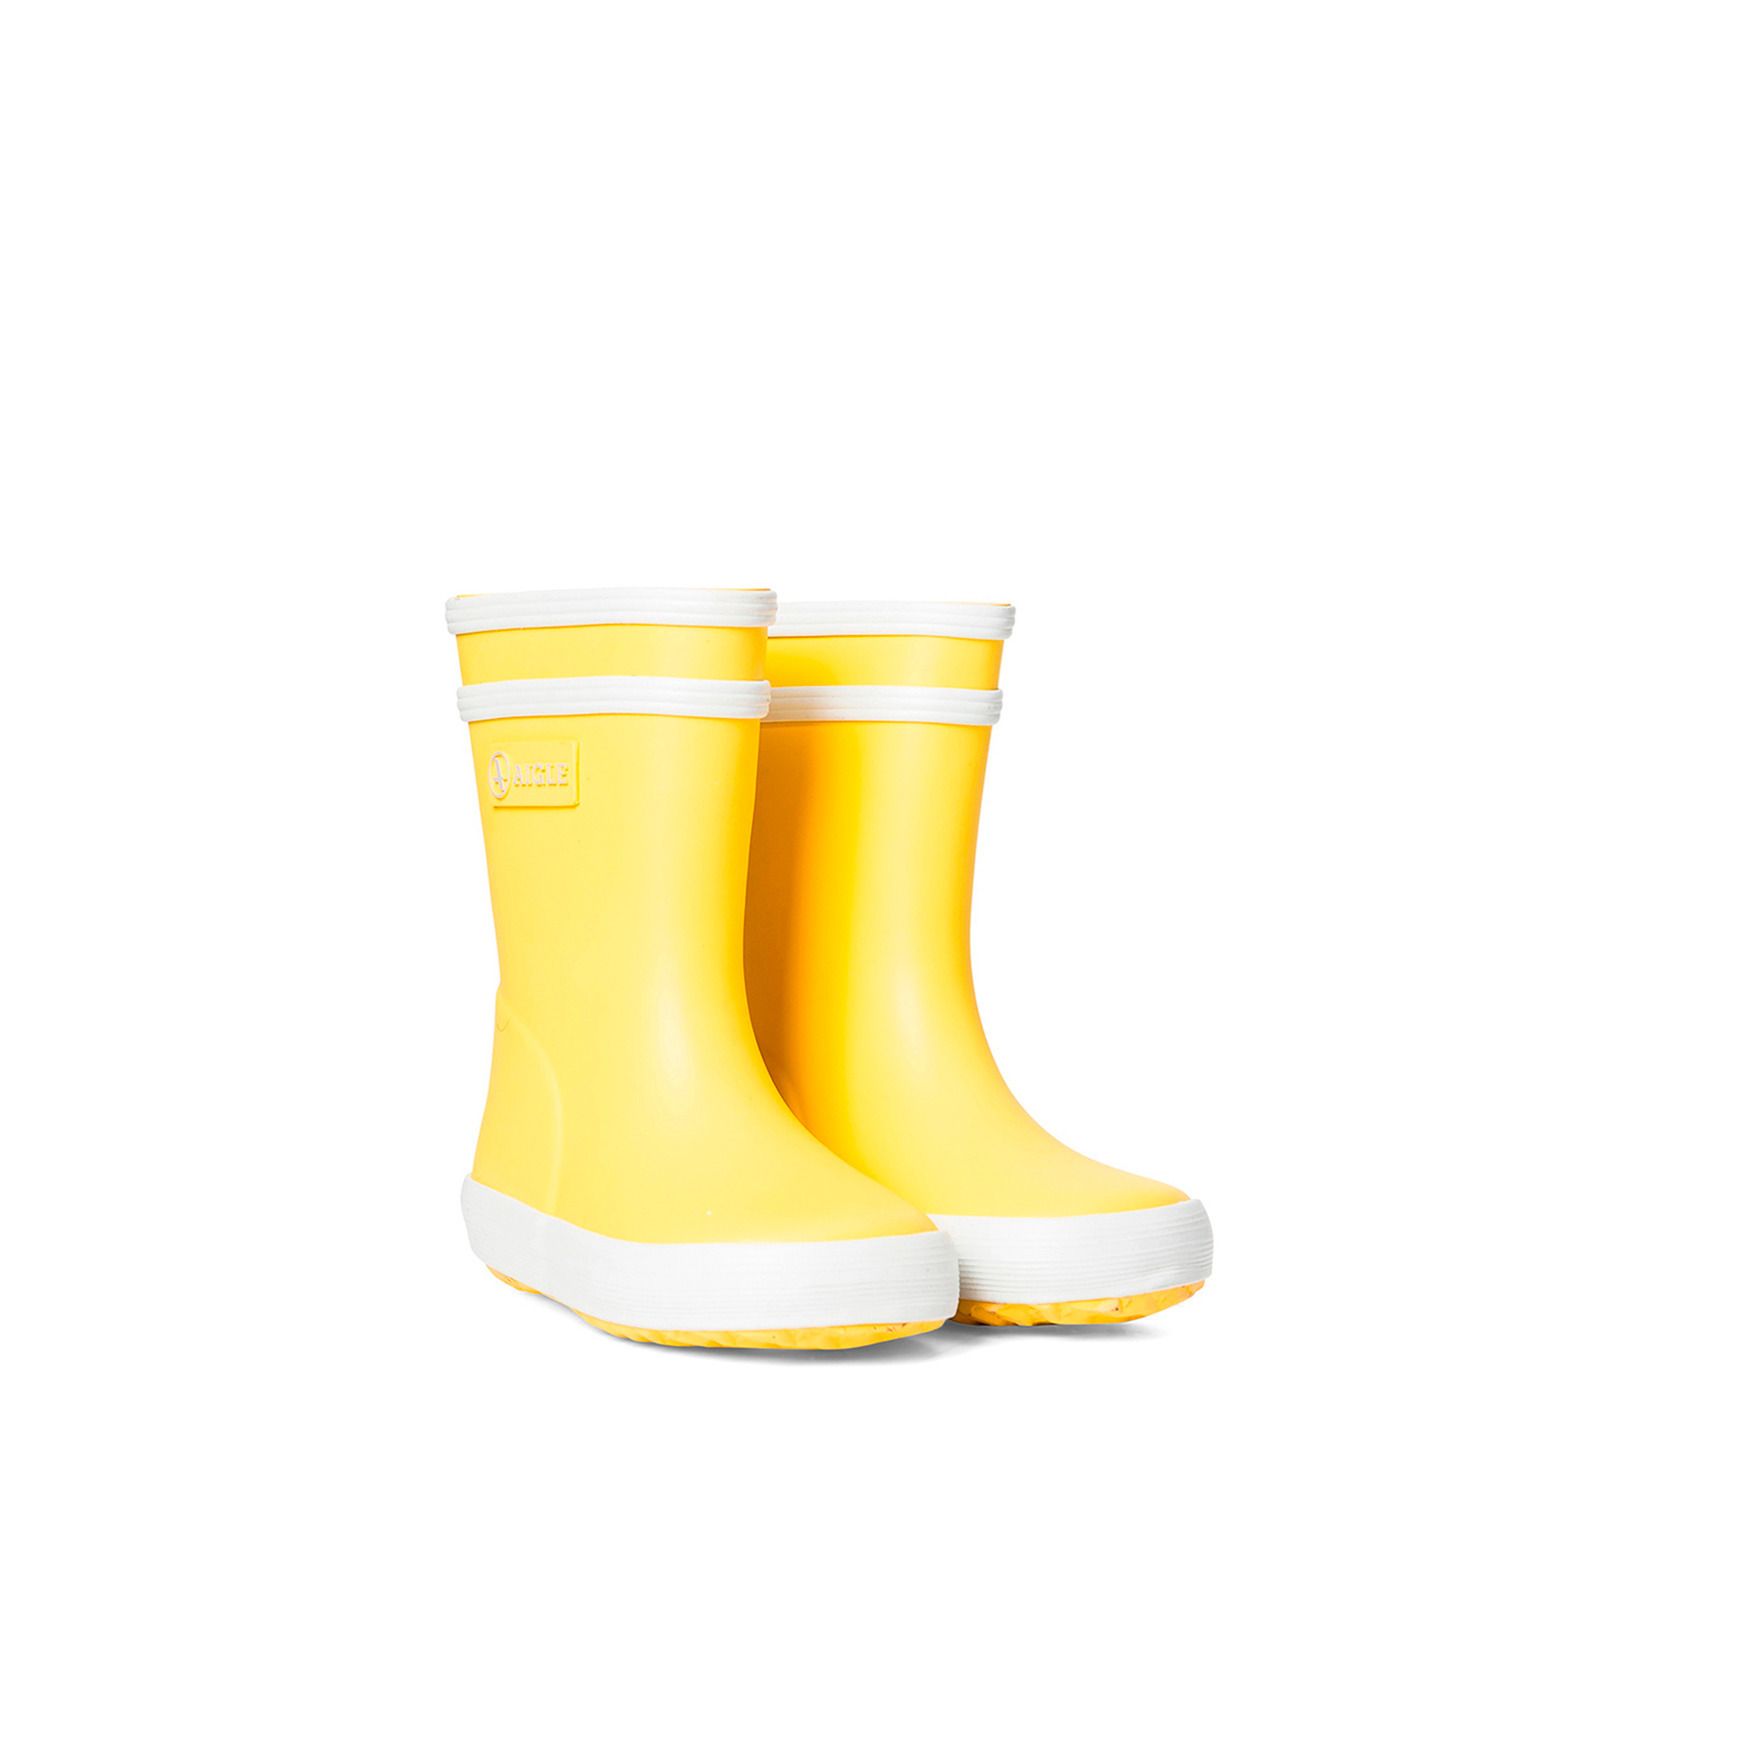 Flac Baby Rain Boots Yellow Aigle Shoes Baby